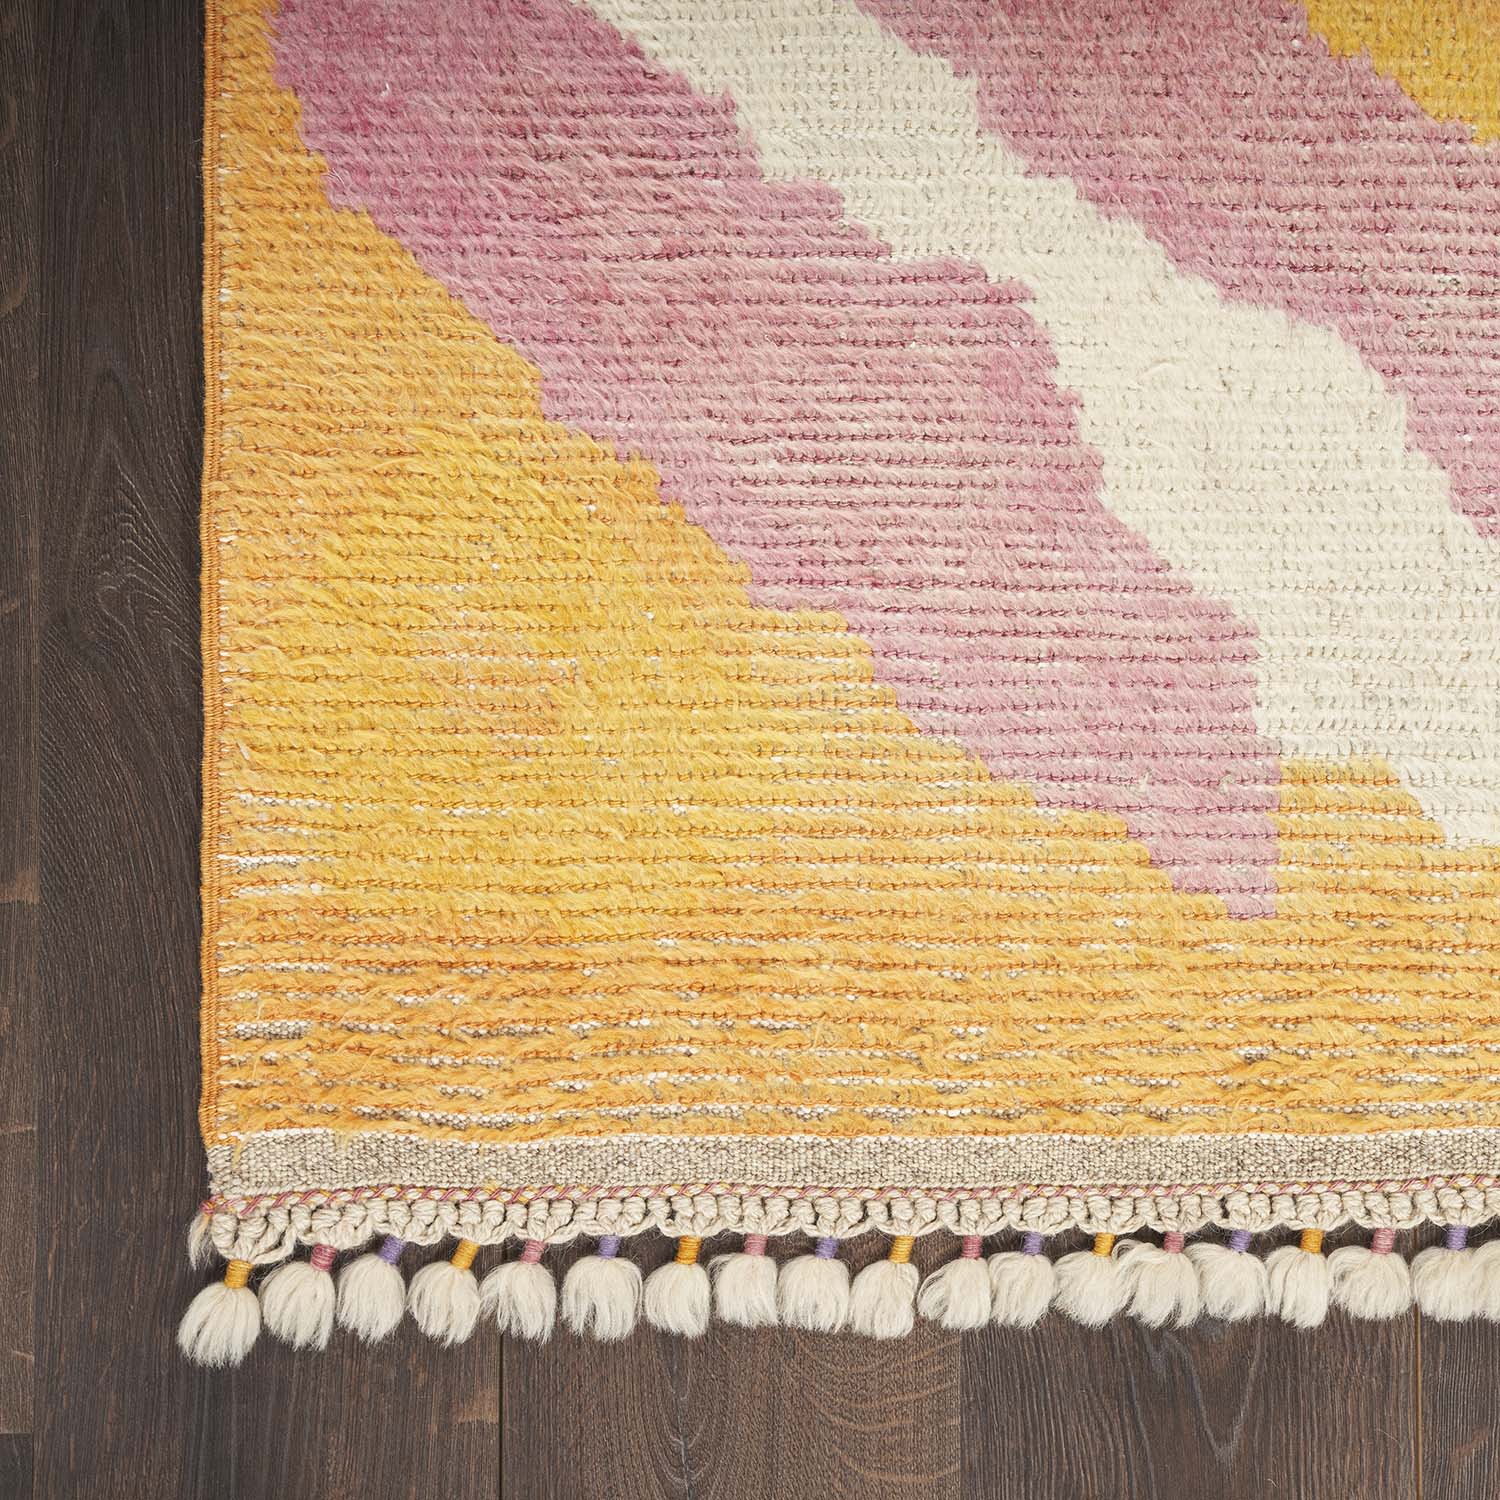 Vibrant geometric rug with diagonal stripes adds movement to space.